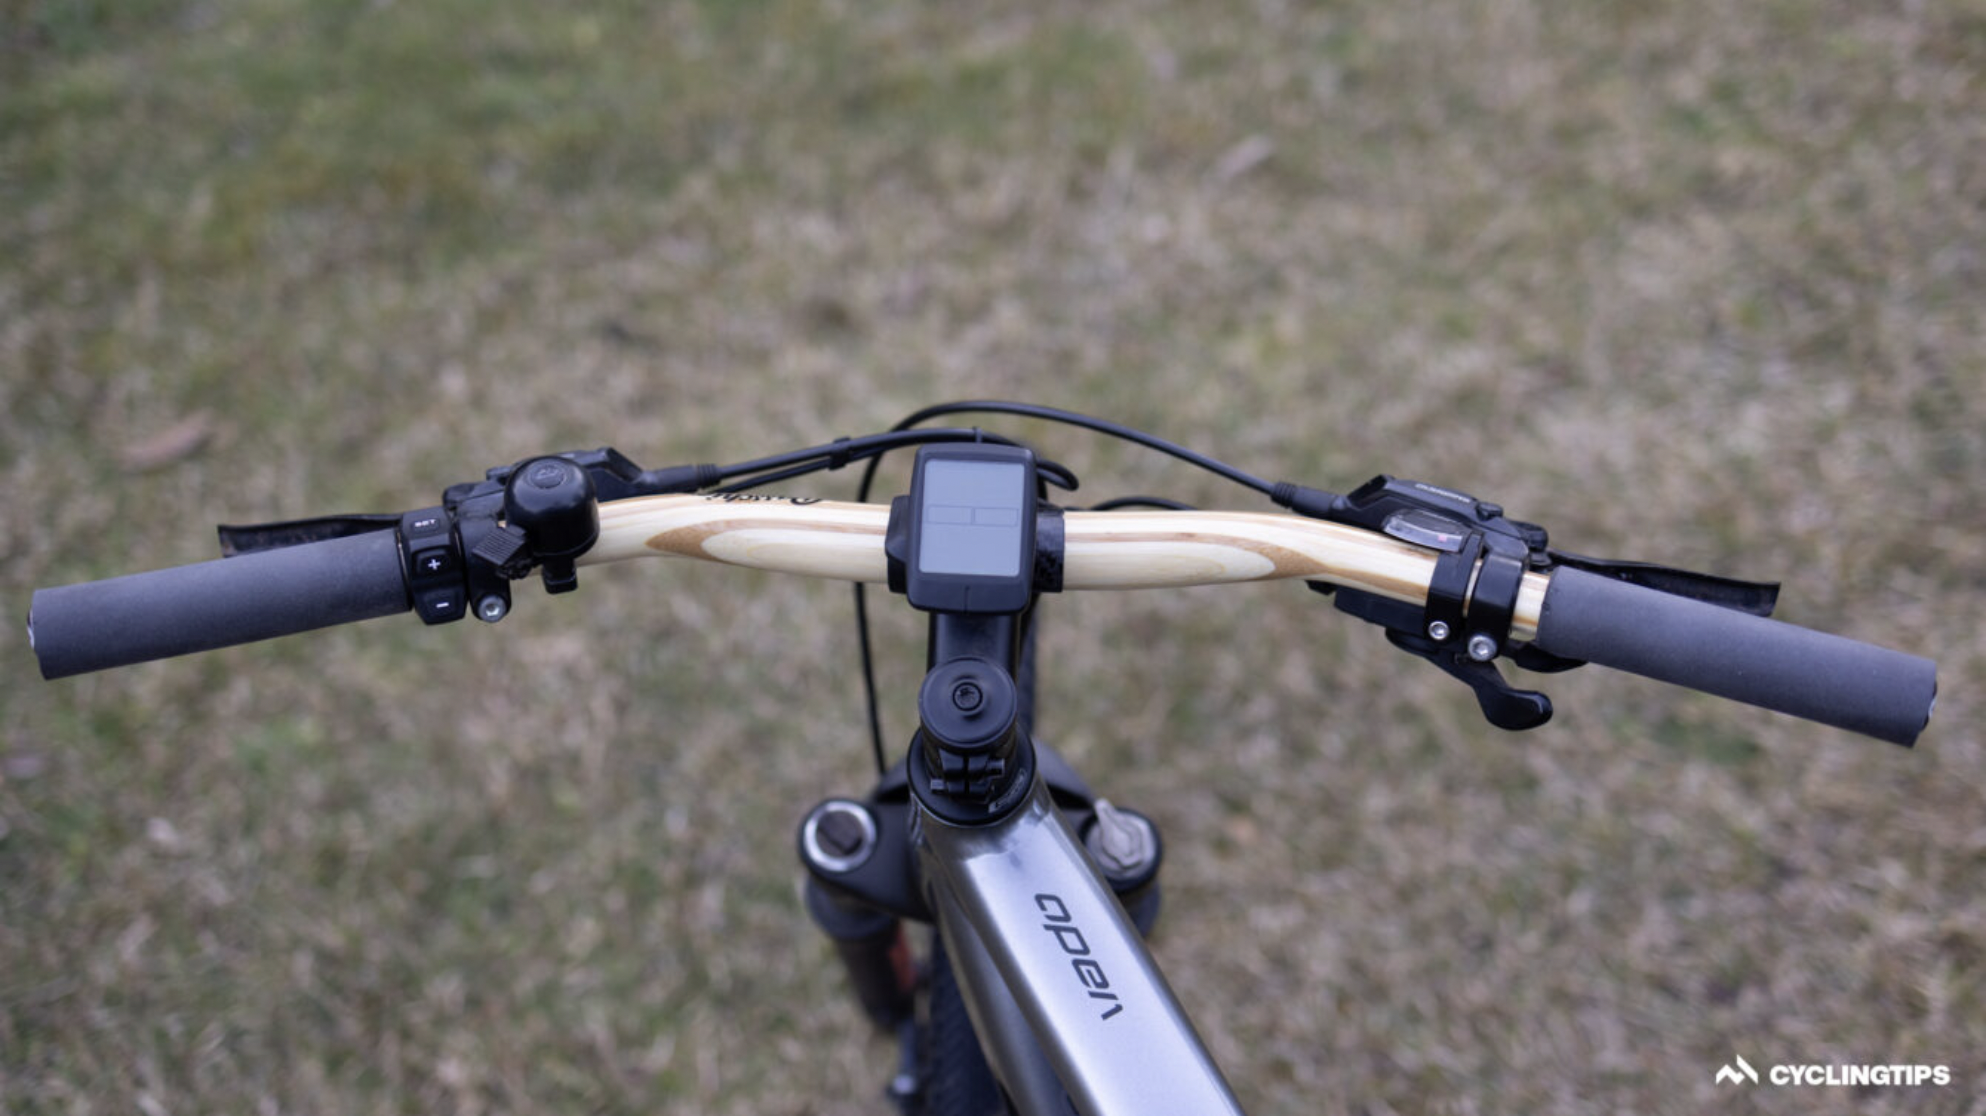 Passchier Gump Bamboo Handlebar Review: Oh so comfy